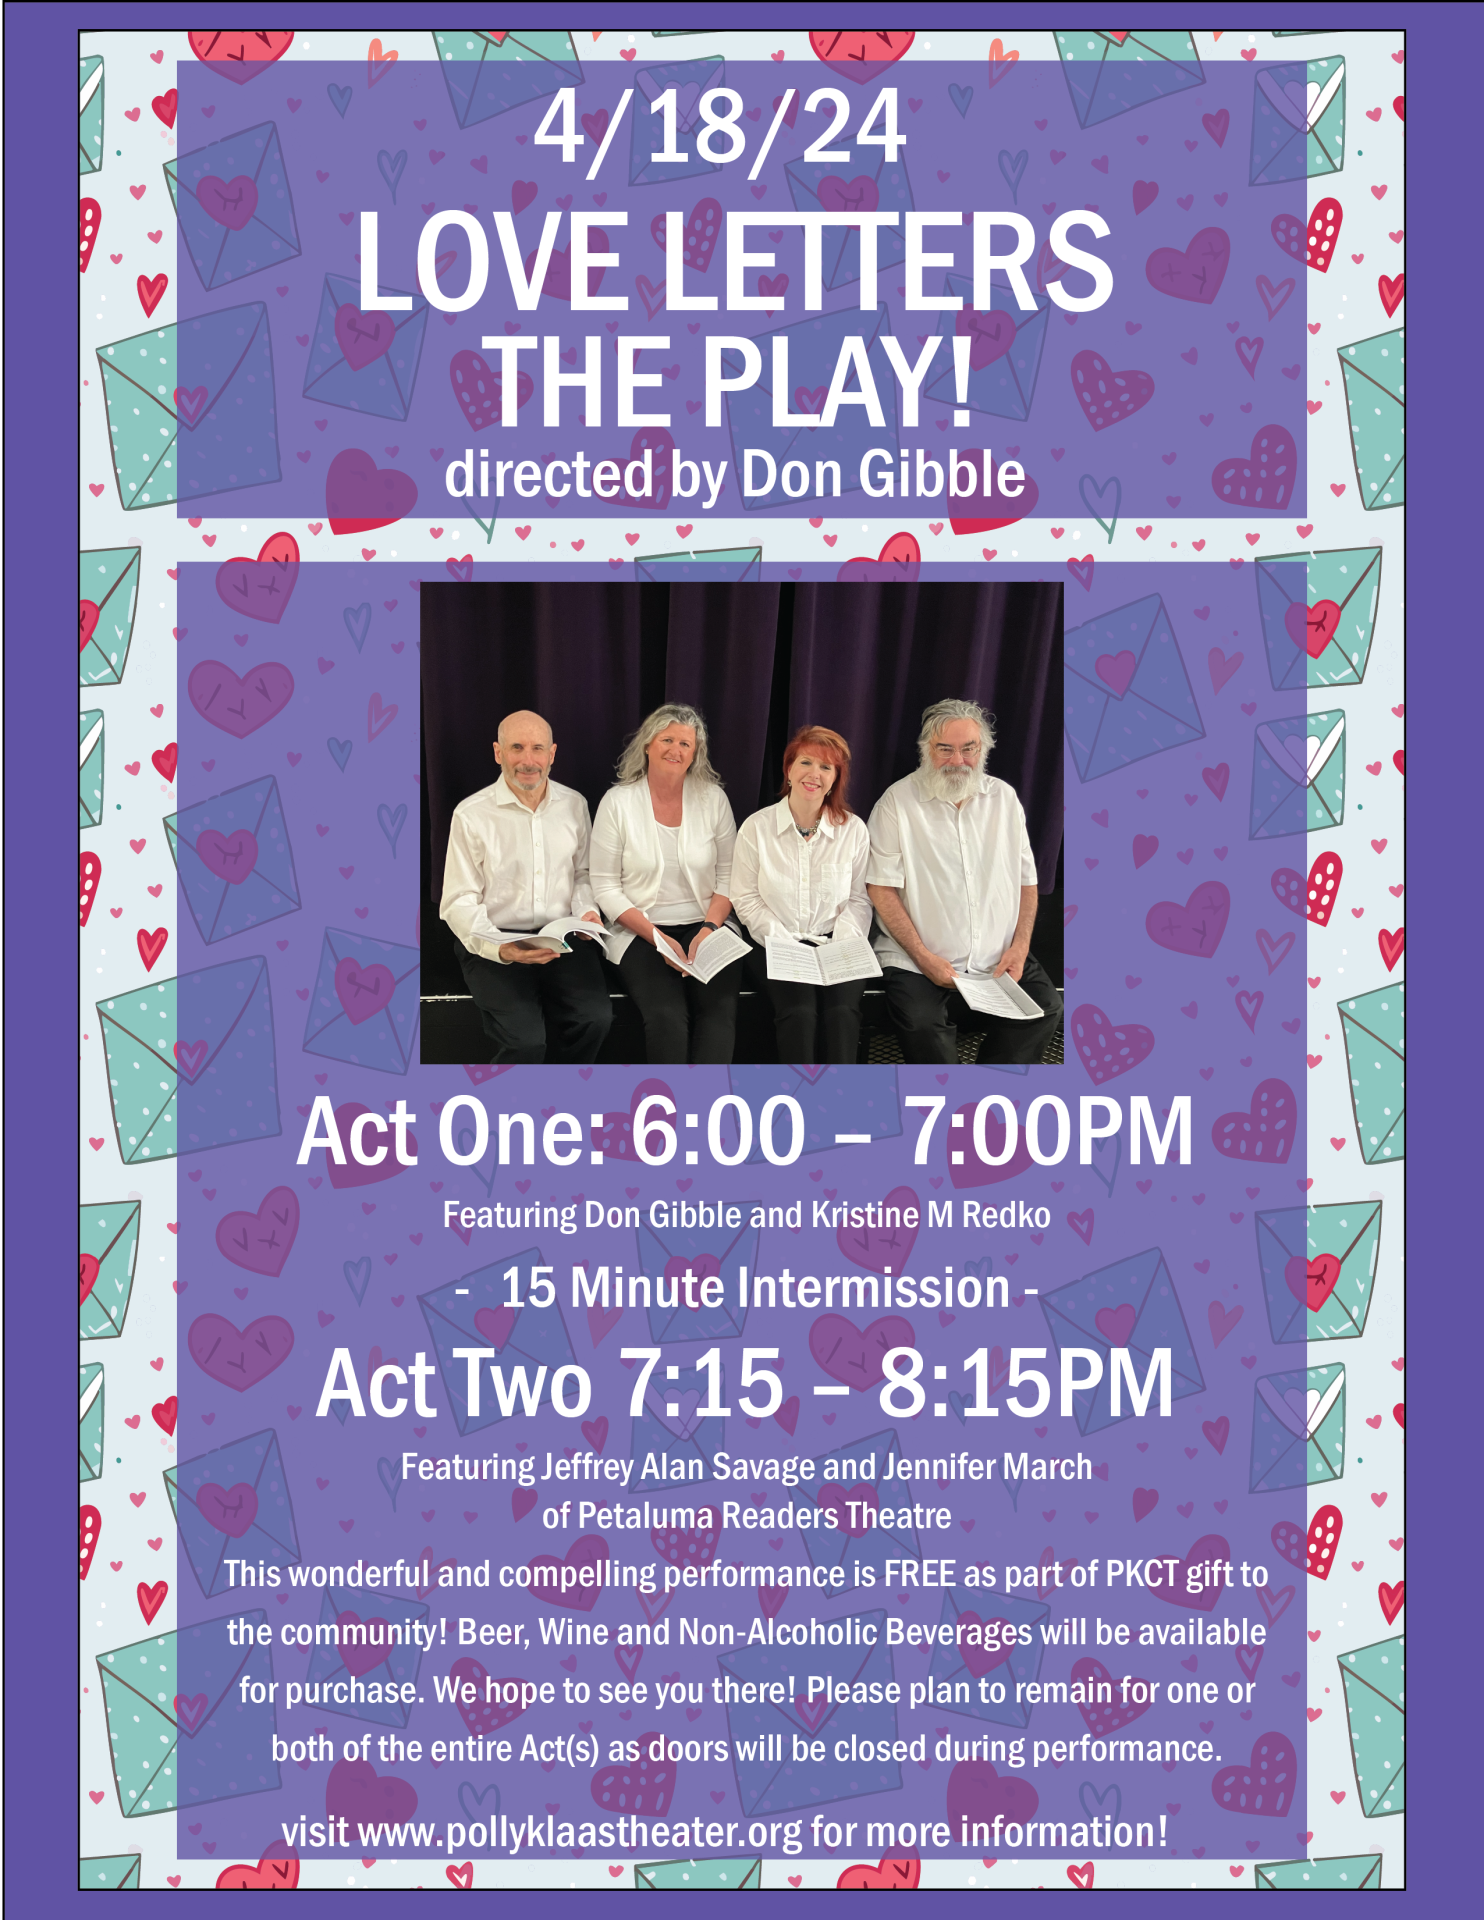 Love Letters flyer edited 2